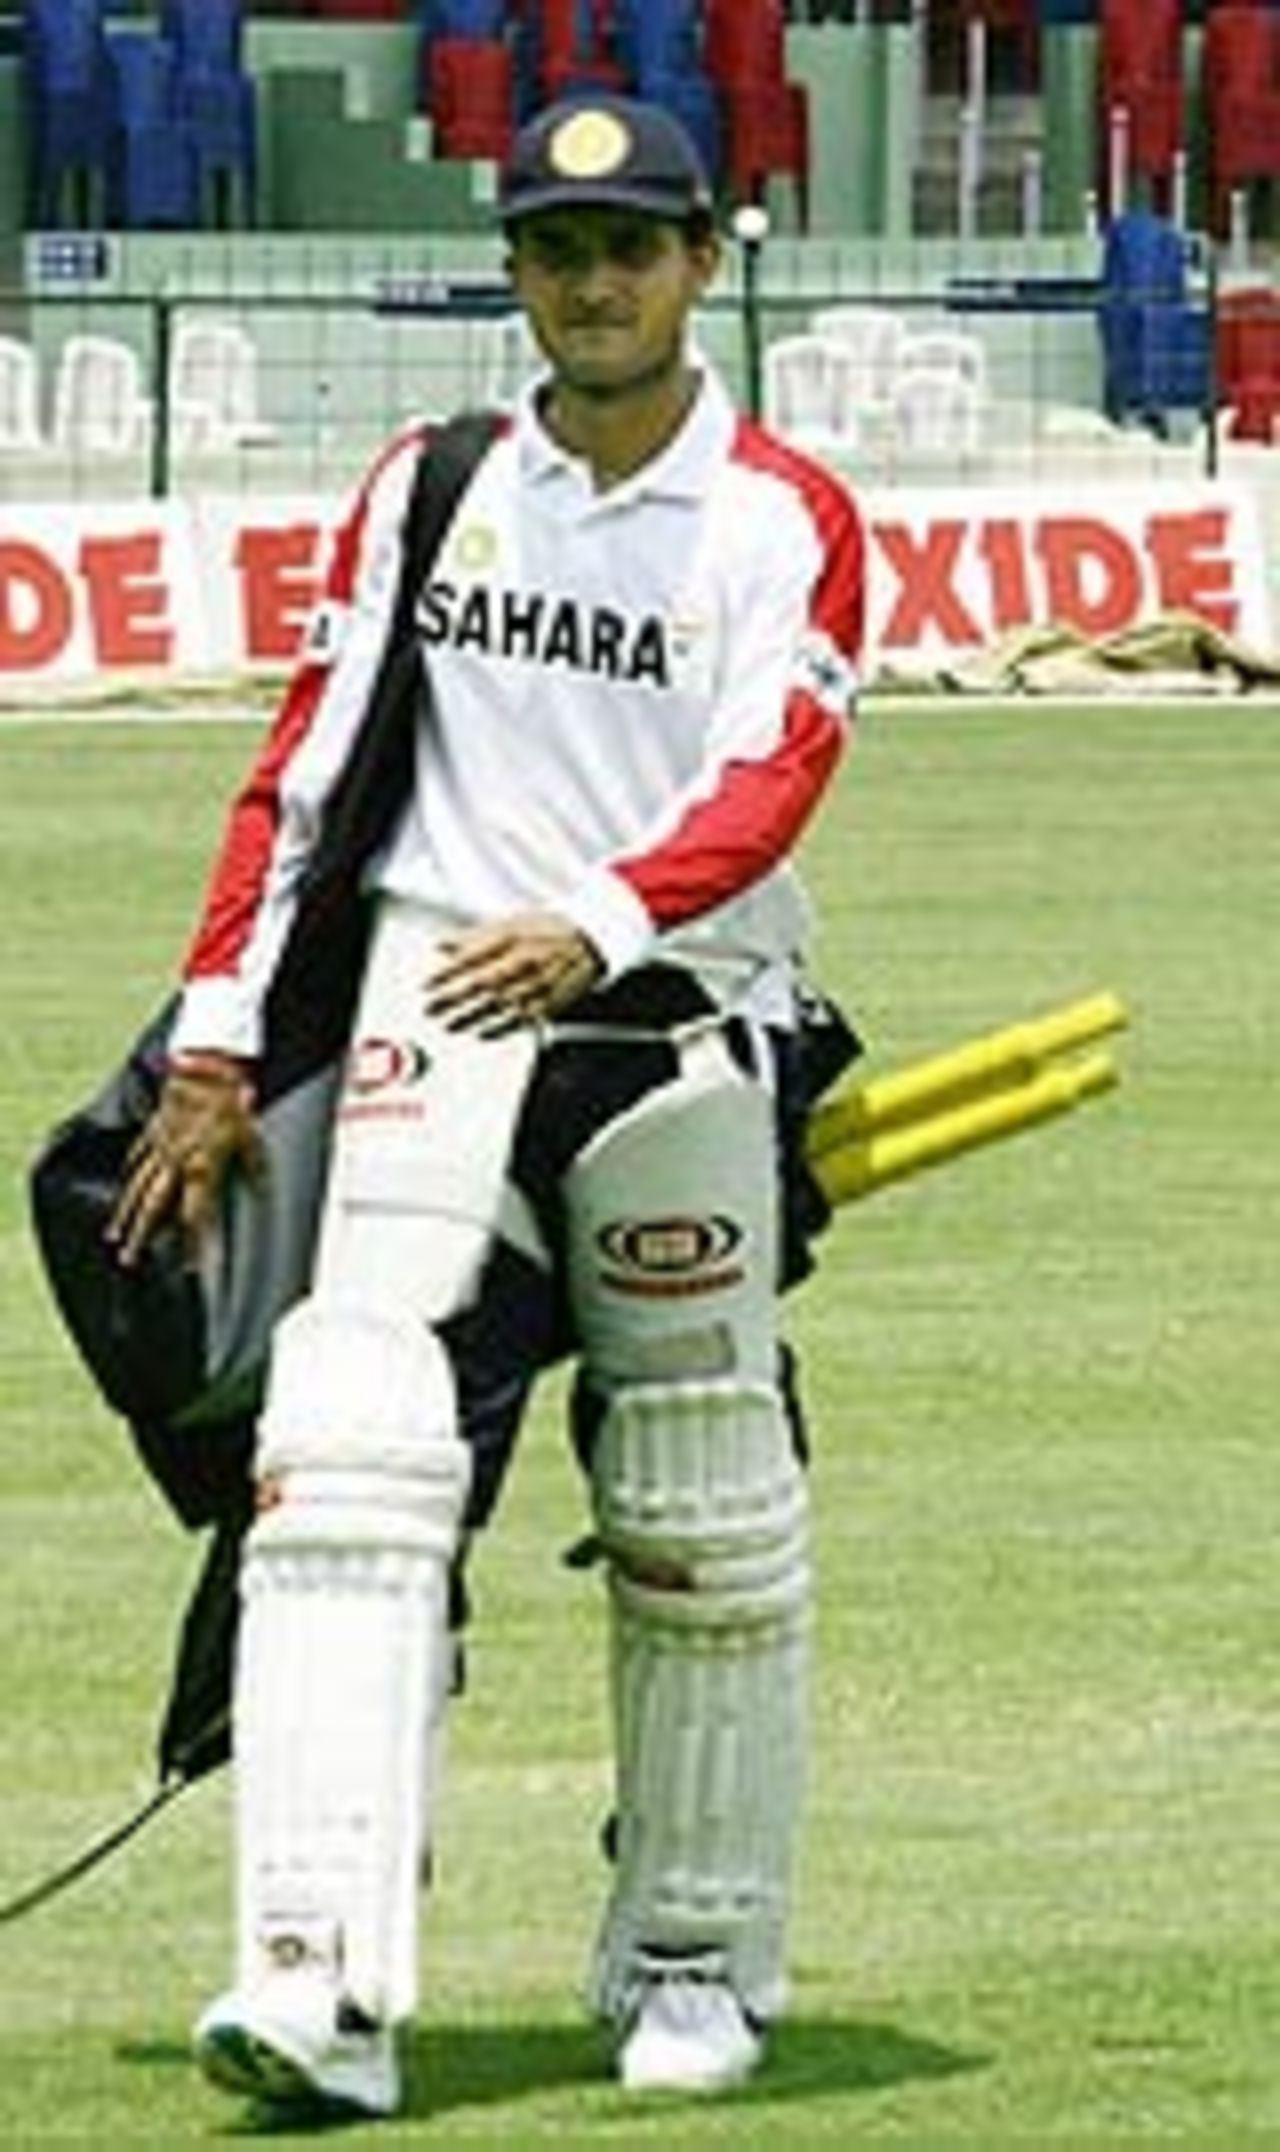 Sourav Ganguly walks back after a practice session ahead of the 3rd Test against Pakistan, Bangalore, March 23, 2005